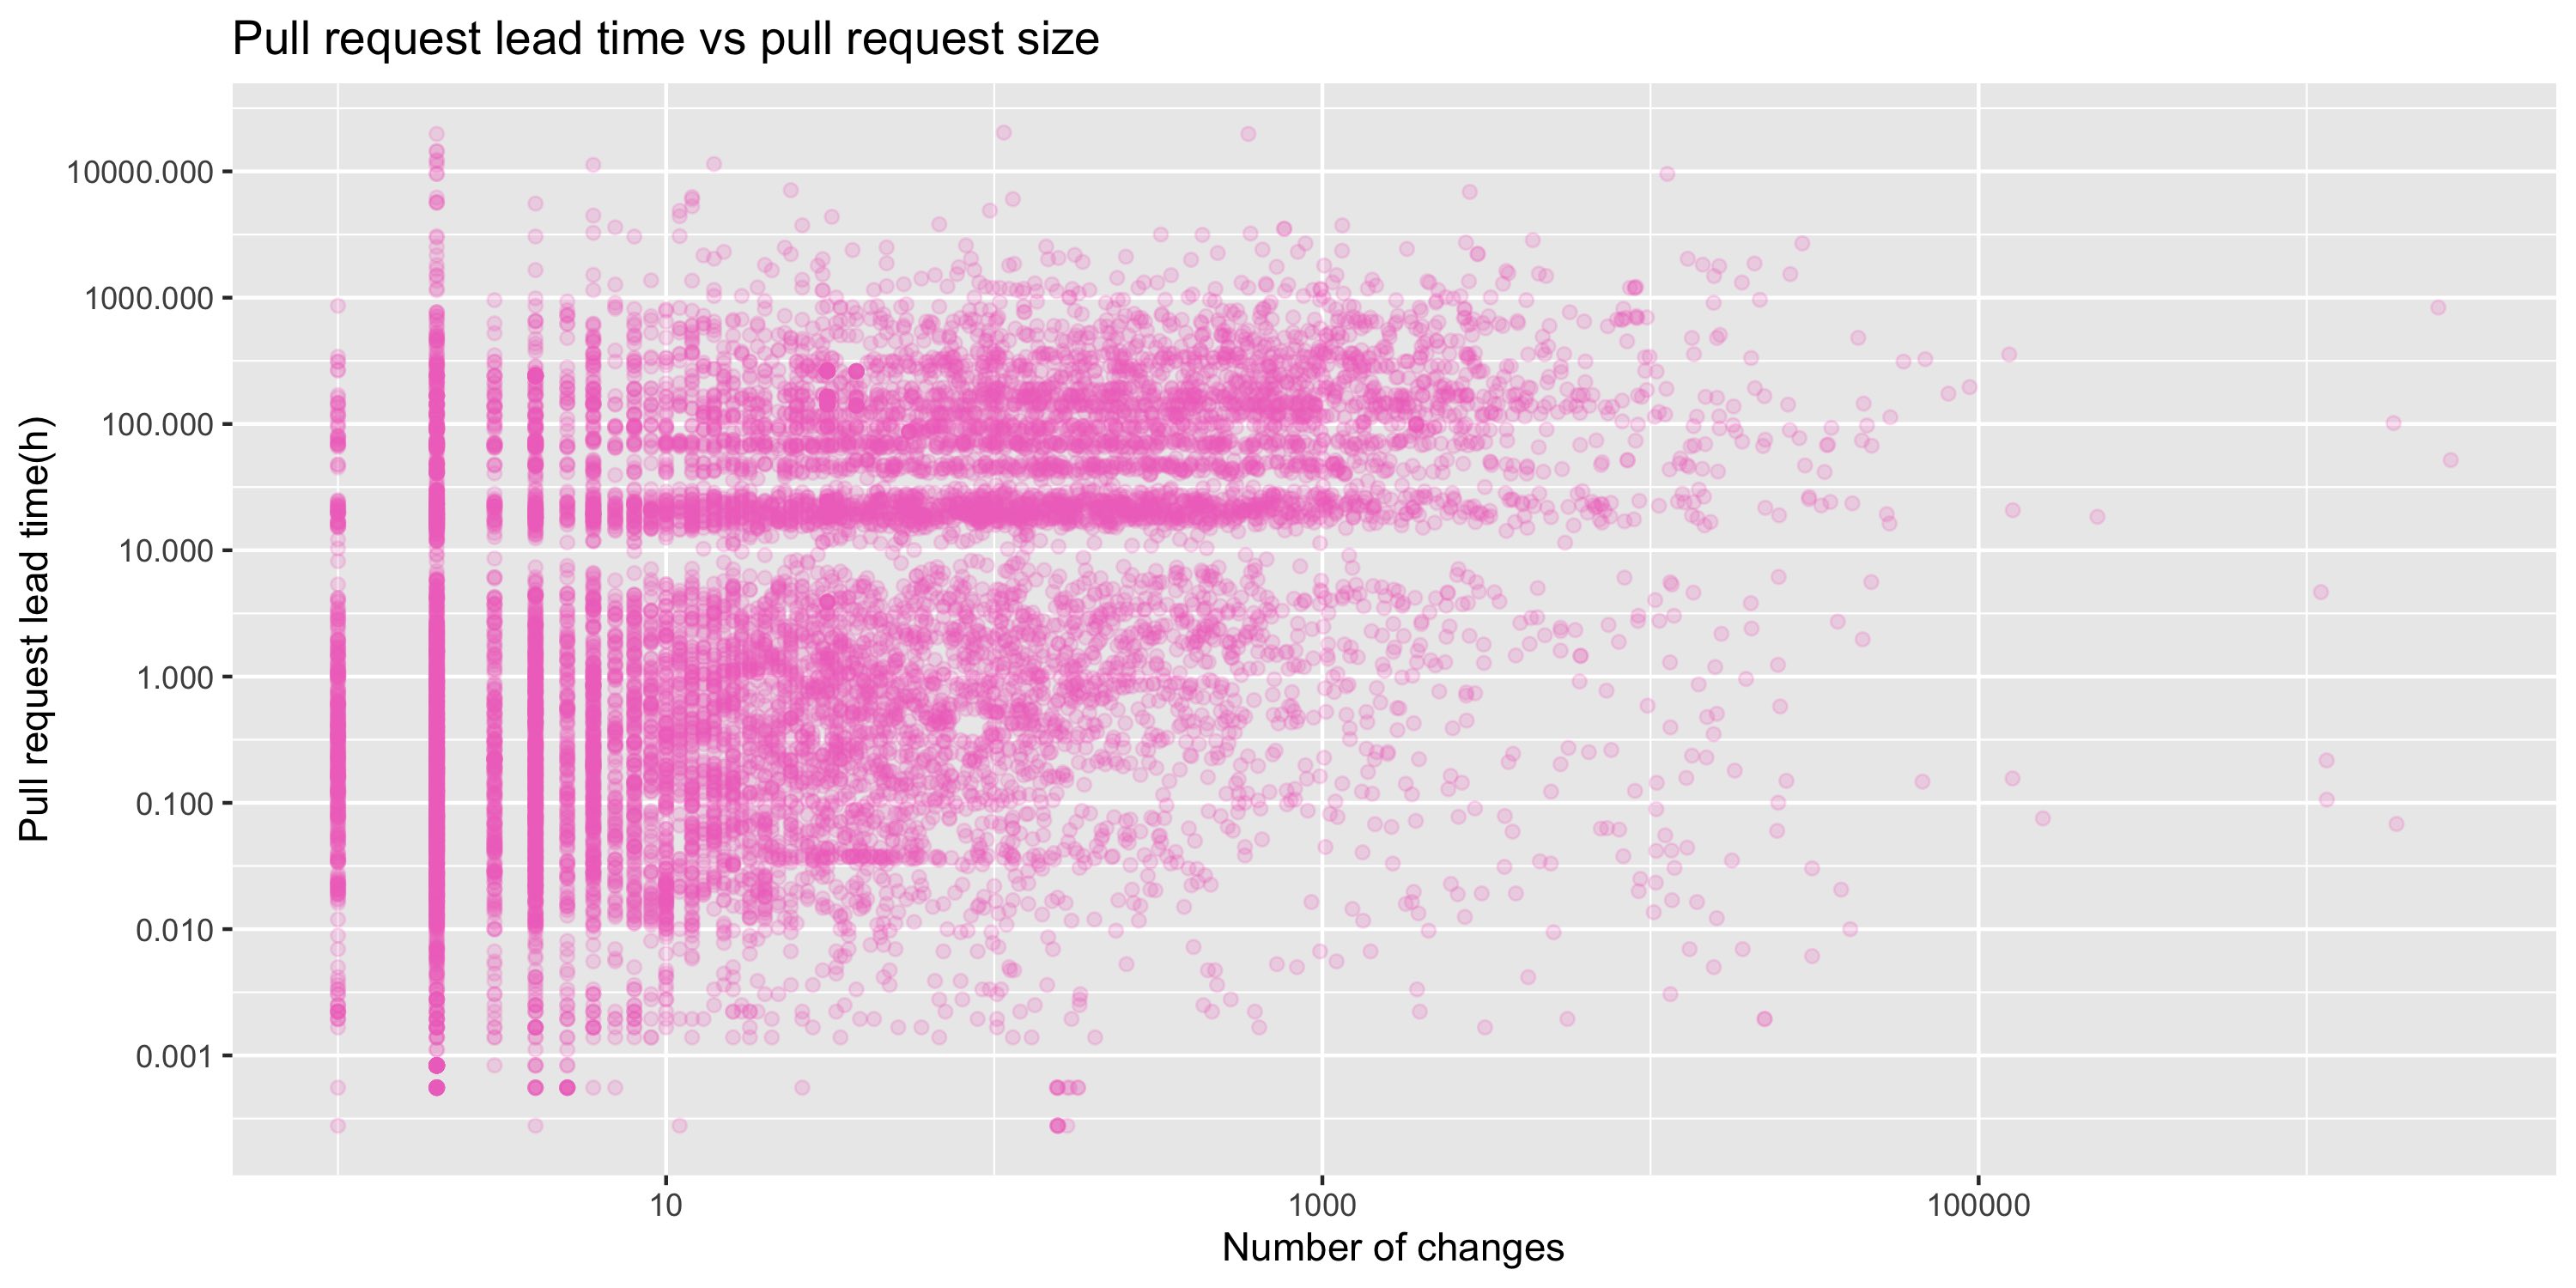 Pull request lead time vs pull request size